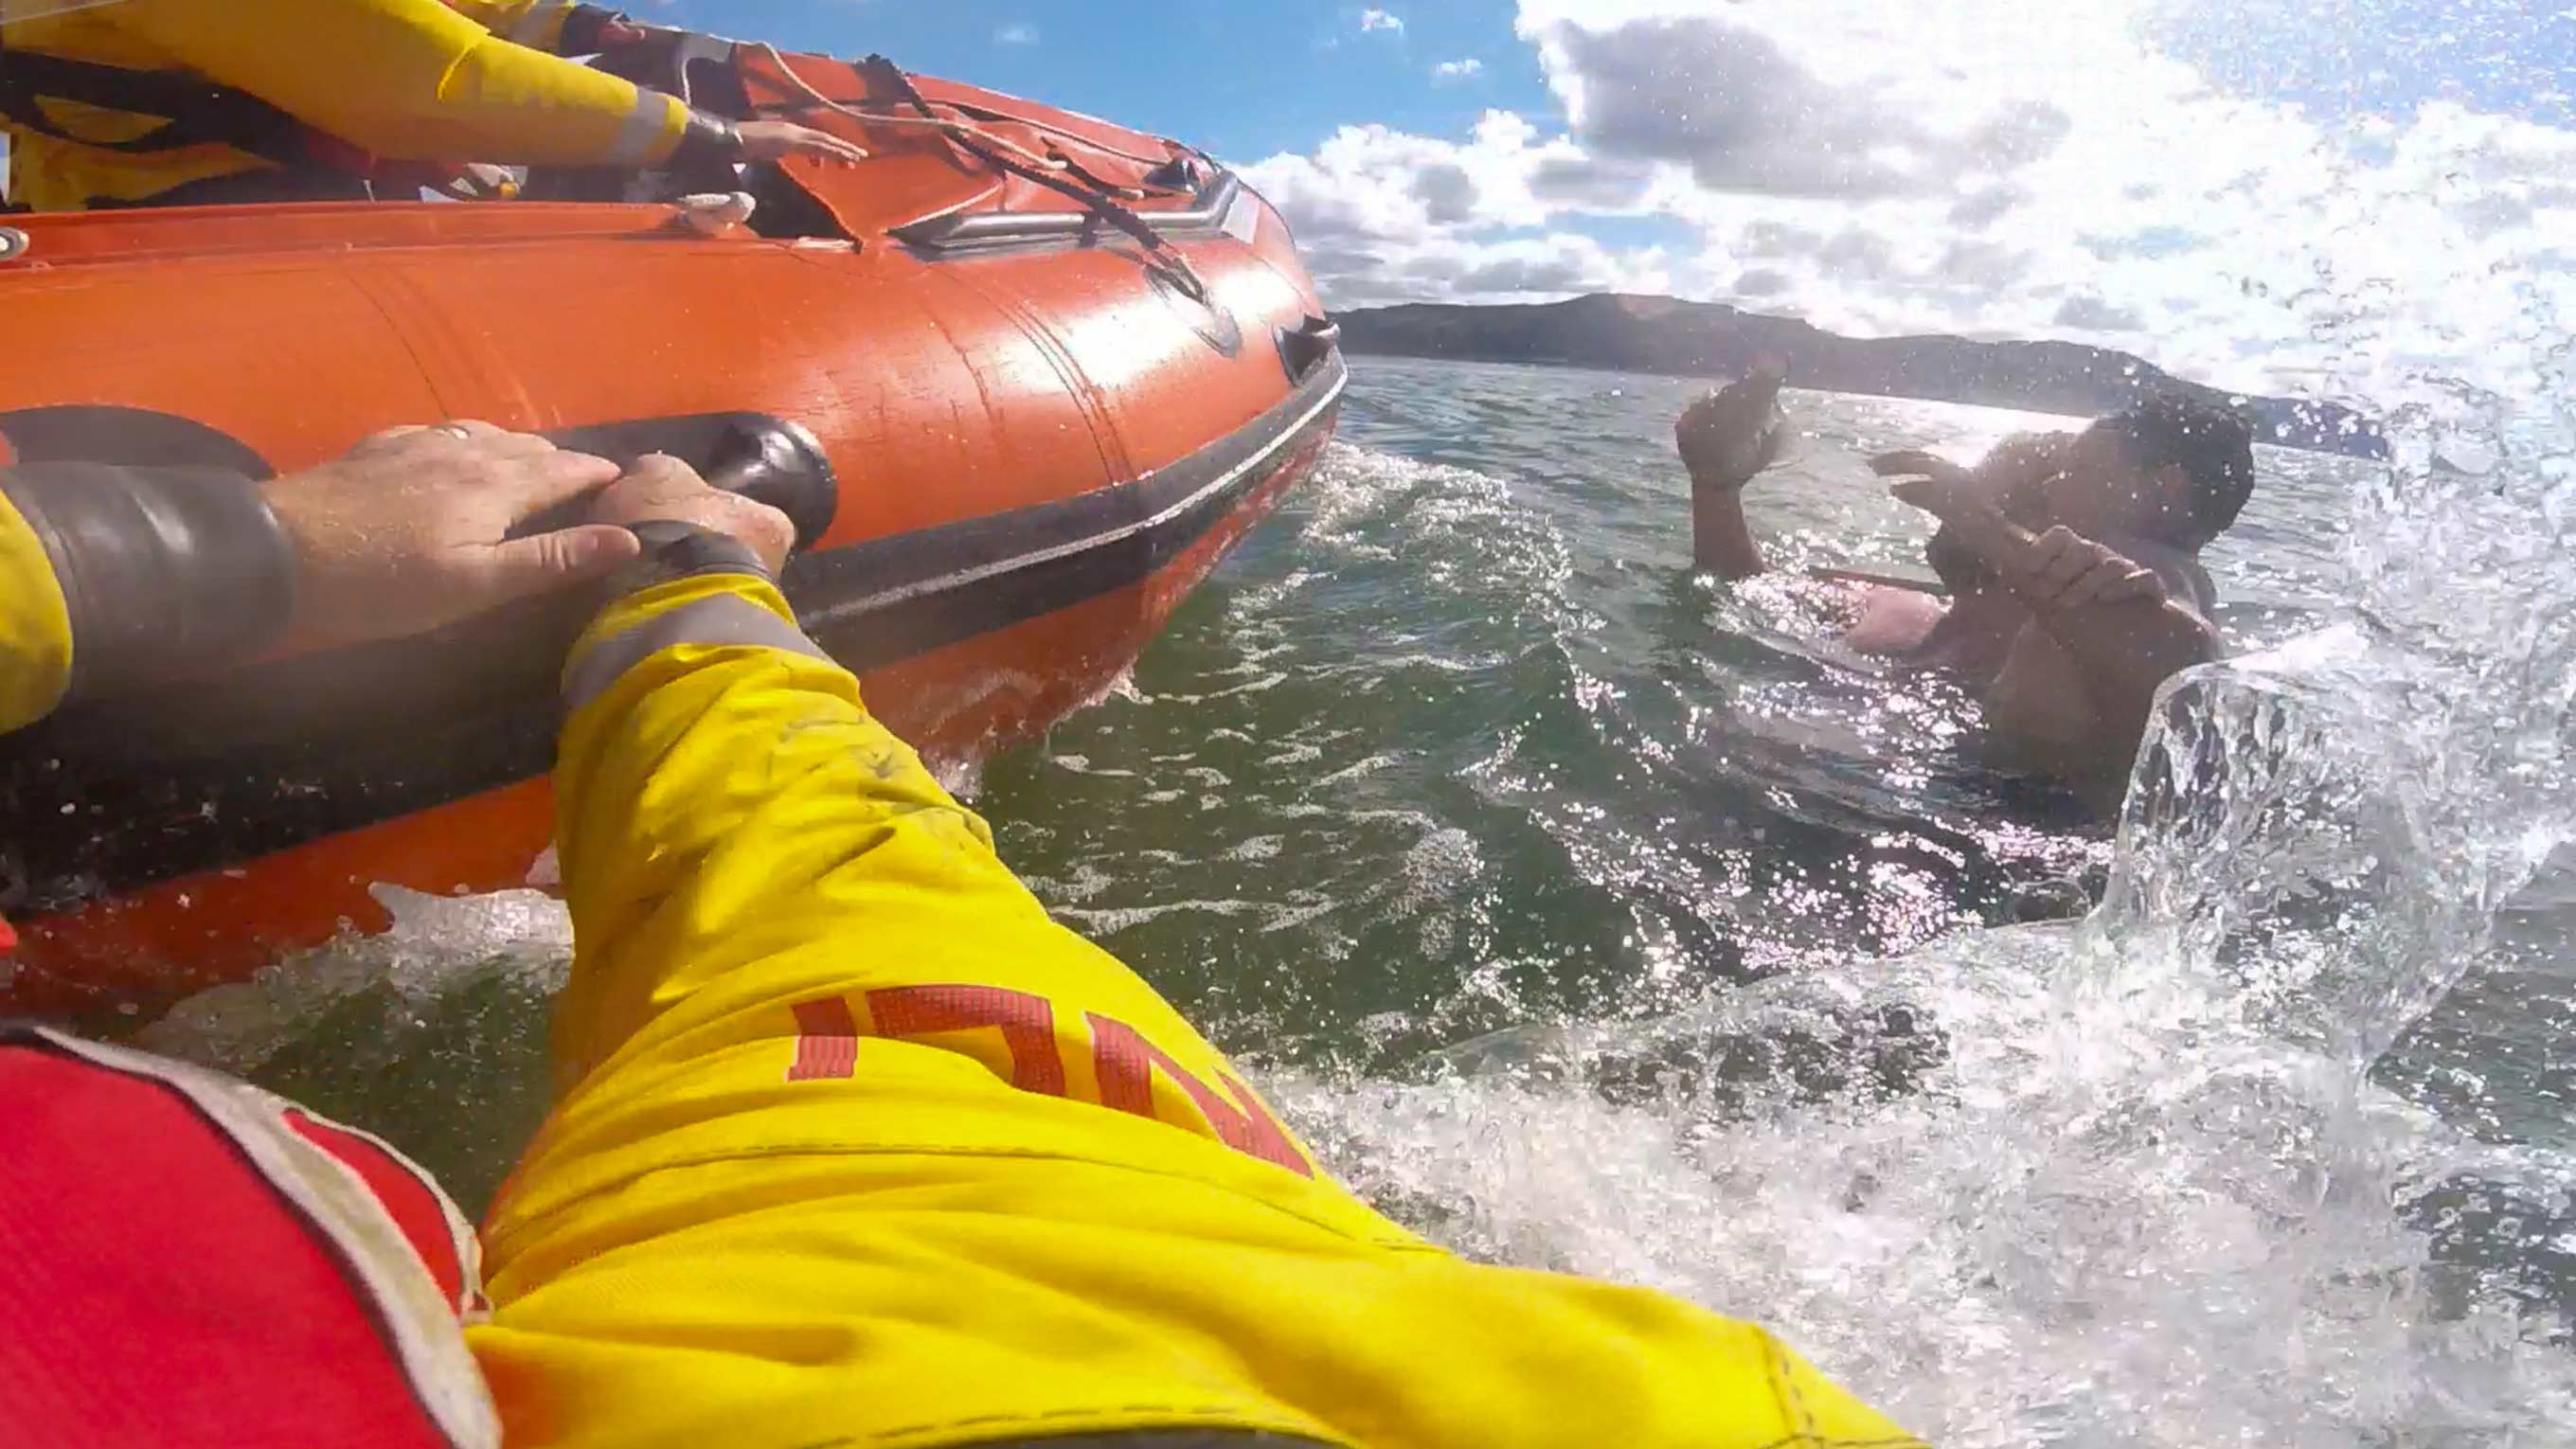 Headcam footage from a lifeboat crew member jumping into the water to save a man and child